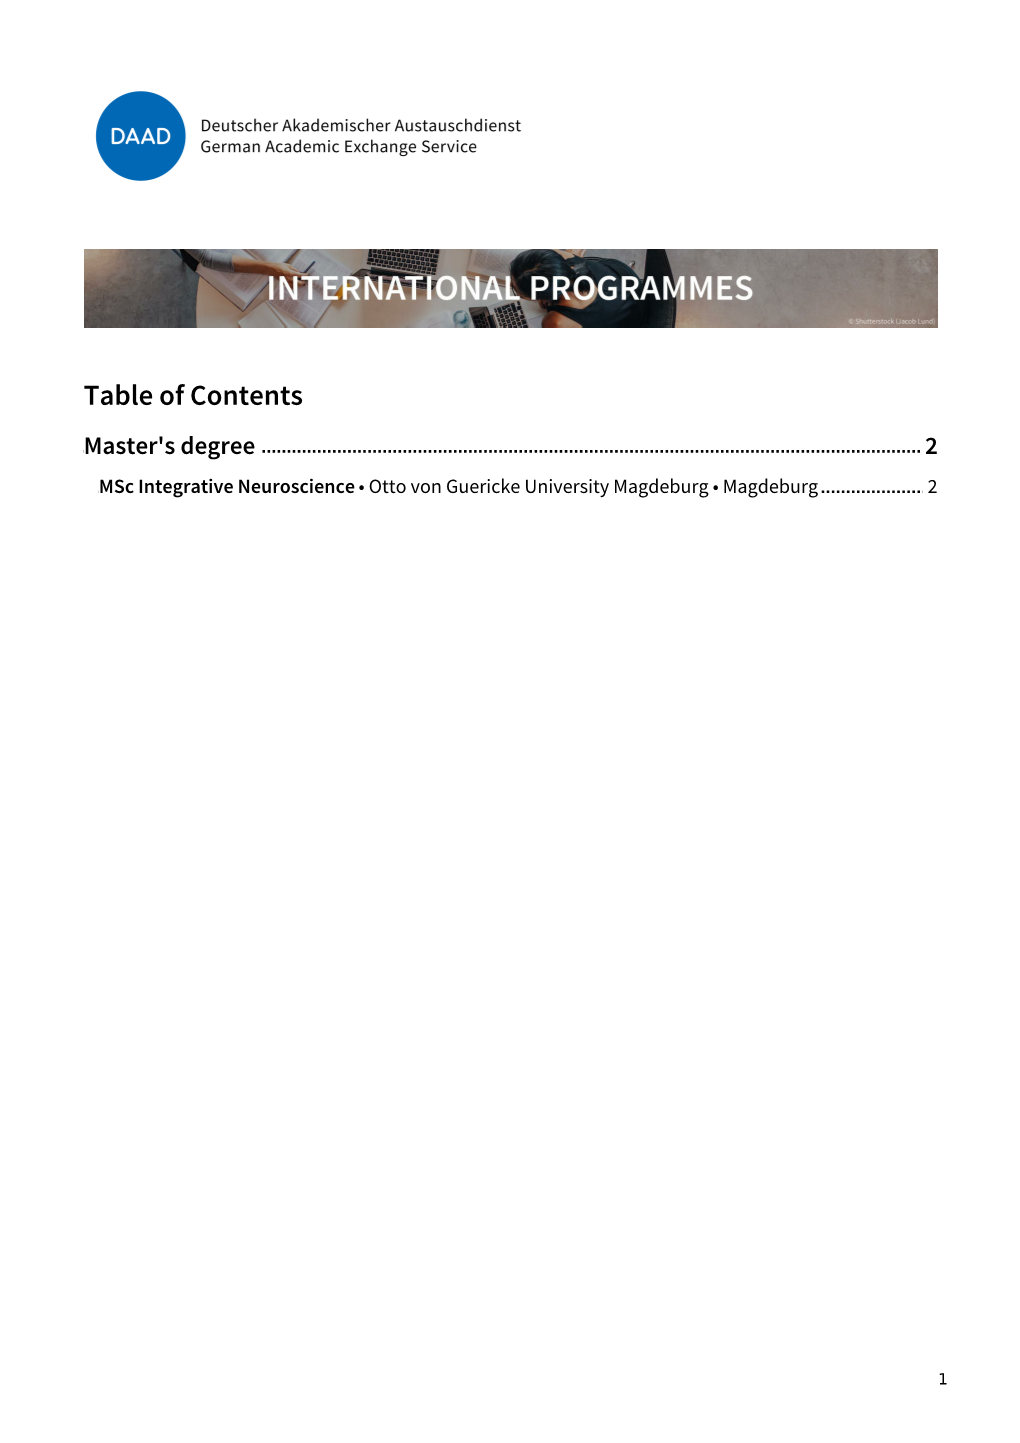 Table of Contents Master's Degree 2 Msc Integrative Neuroscience • Otto Von Guericke University Magdeburg • Magdeburg 2